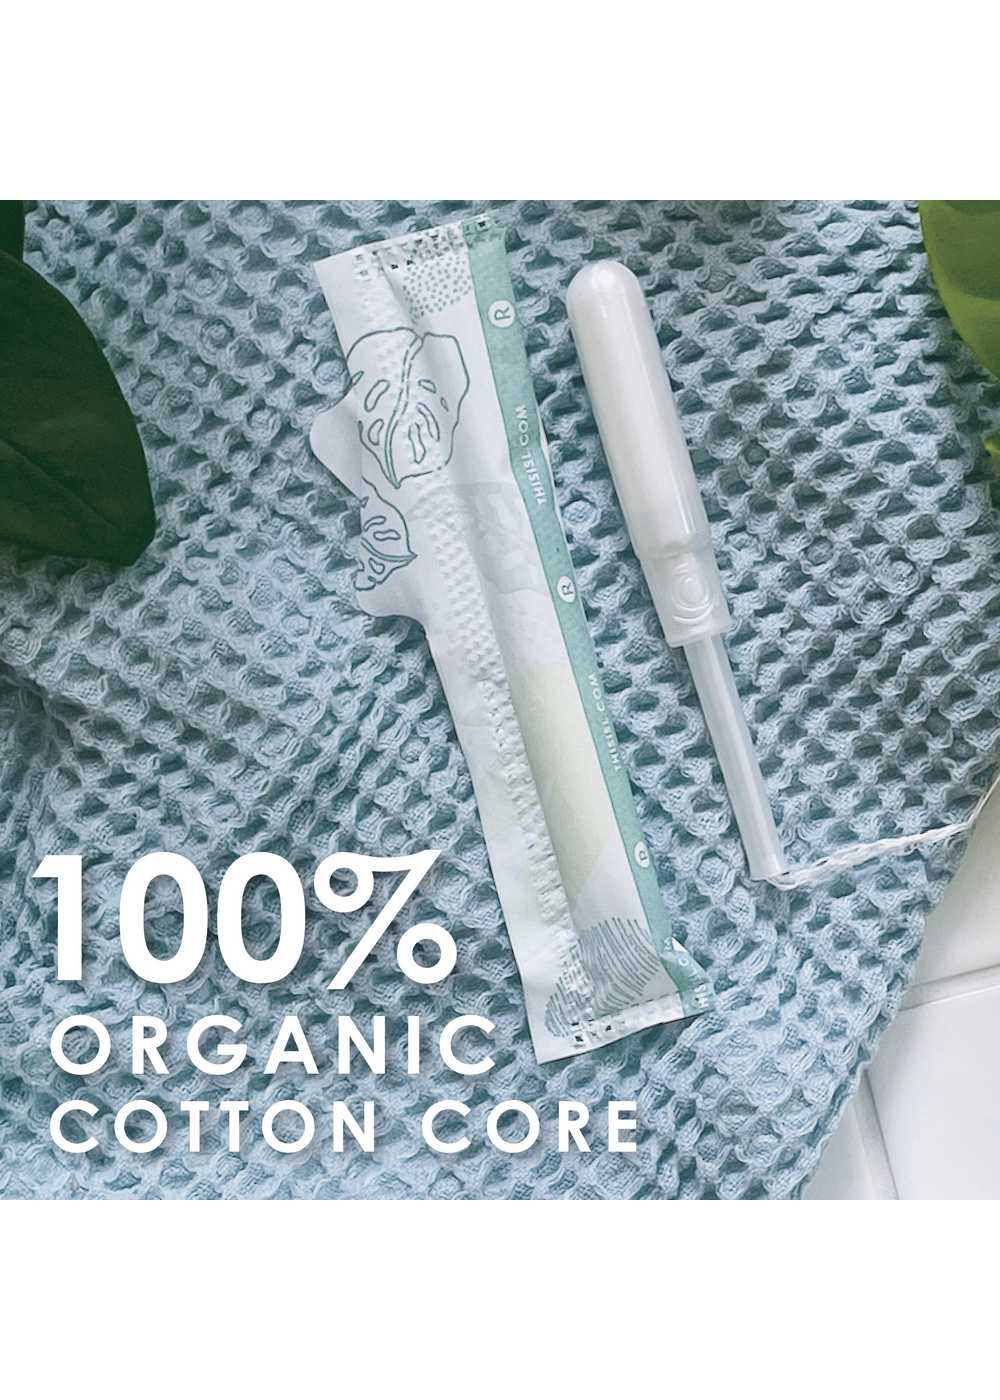 L. Organic Cotton Tampons Super Absorbency; image 5 of 9